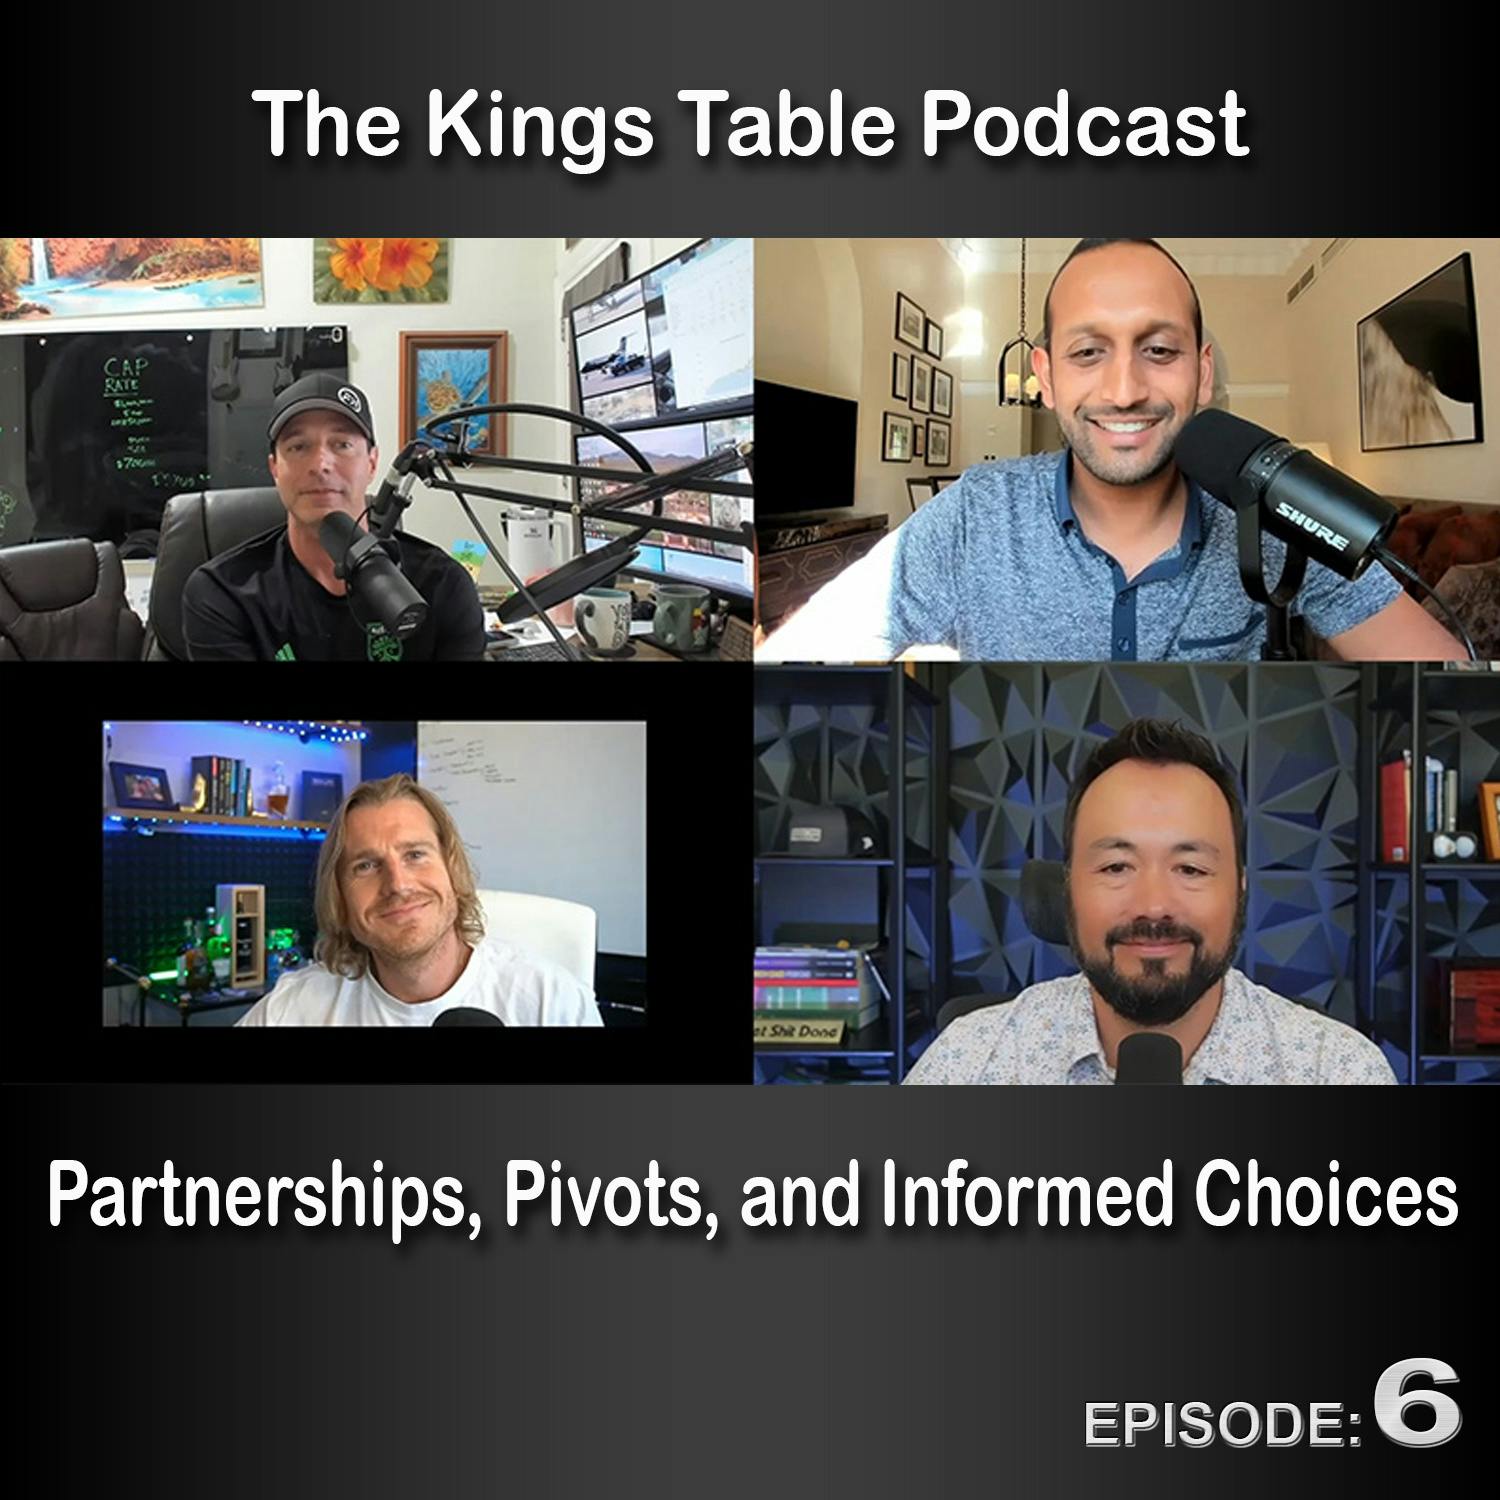 The Kings Table Episode 6 - Partnerships, Pivots, and Informed Choices